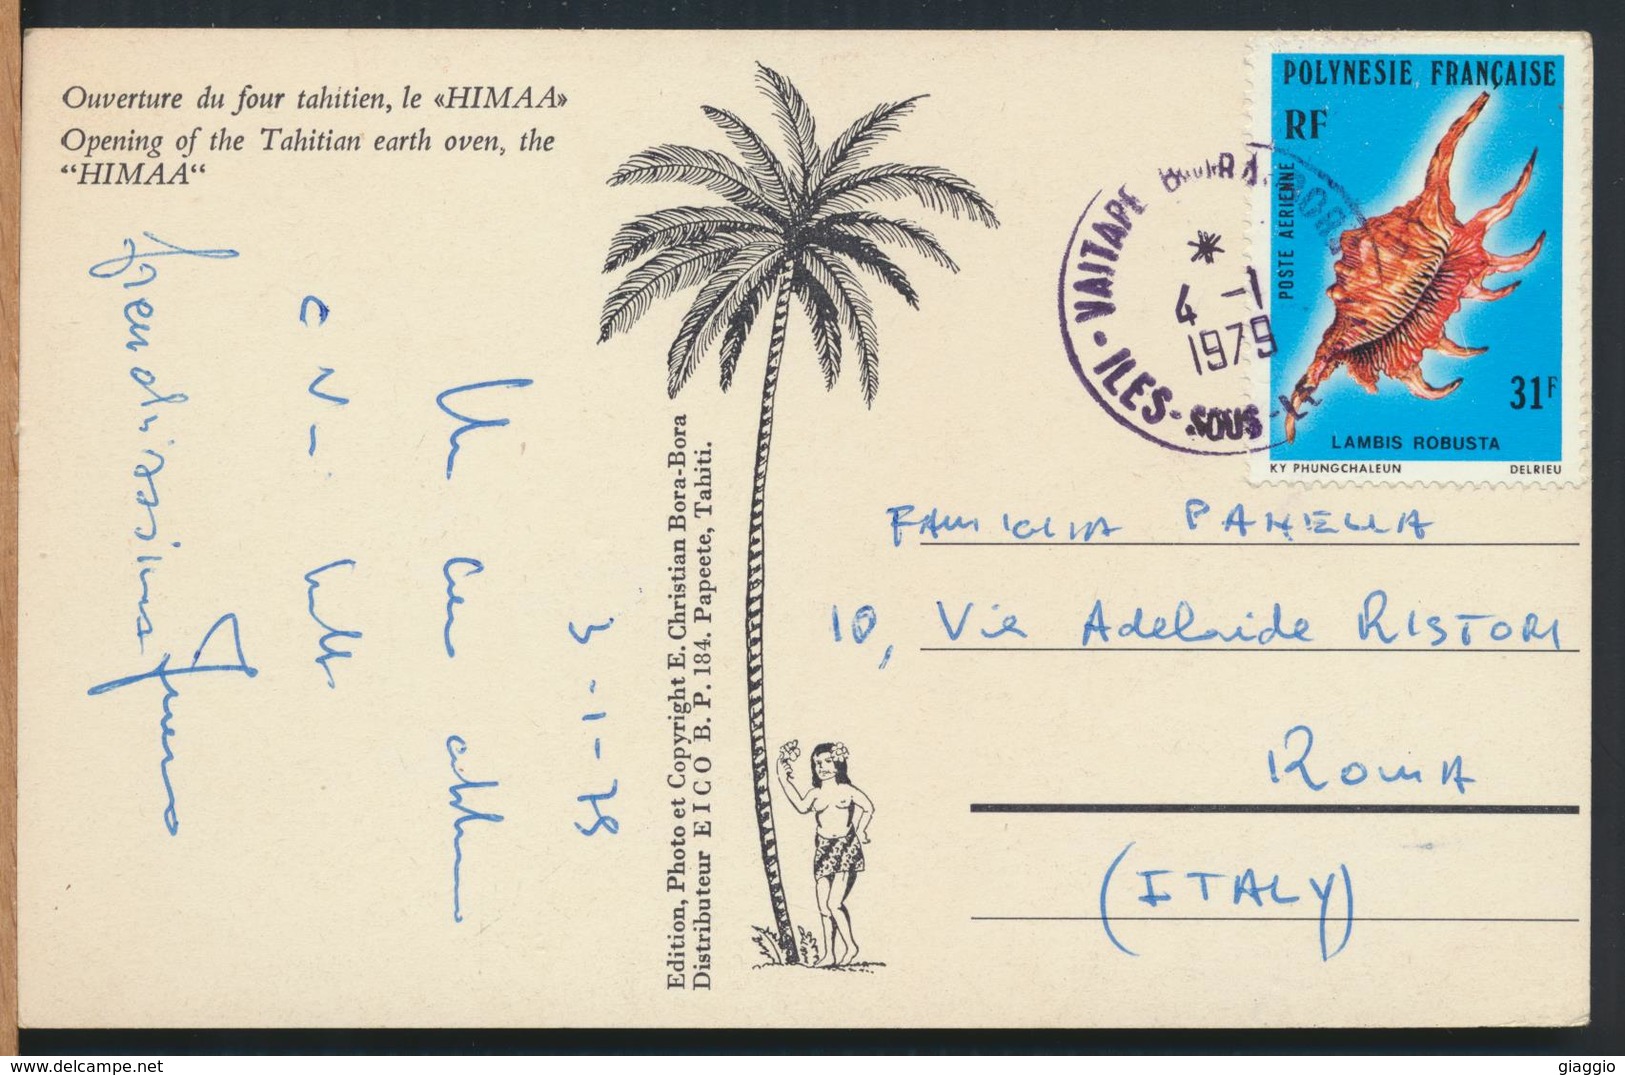 °°° 13076 - POLYNESIE FRANCAISE - HIMAA - 1979 With Stamps °°° - Polinesia Francesa